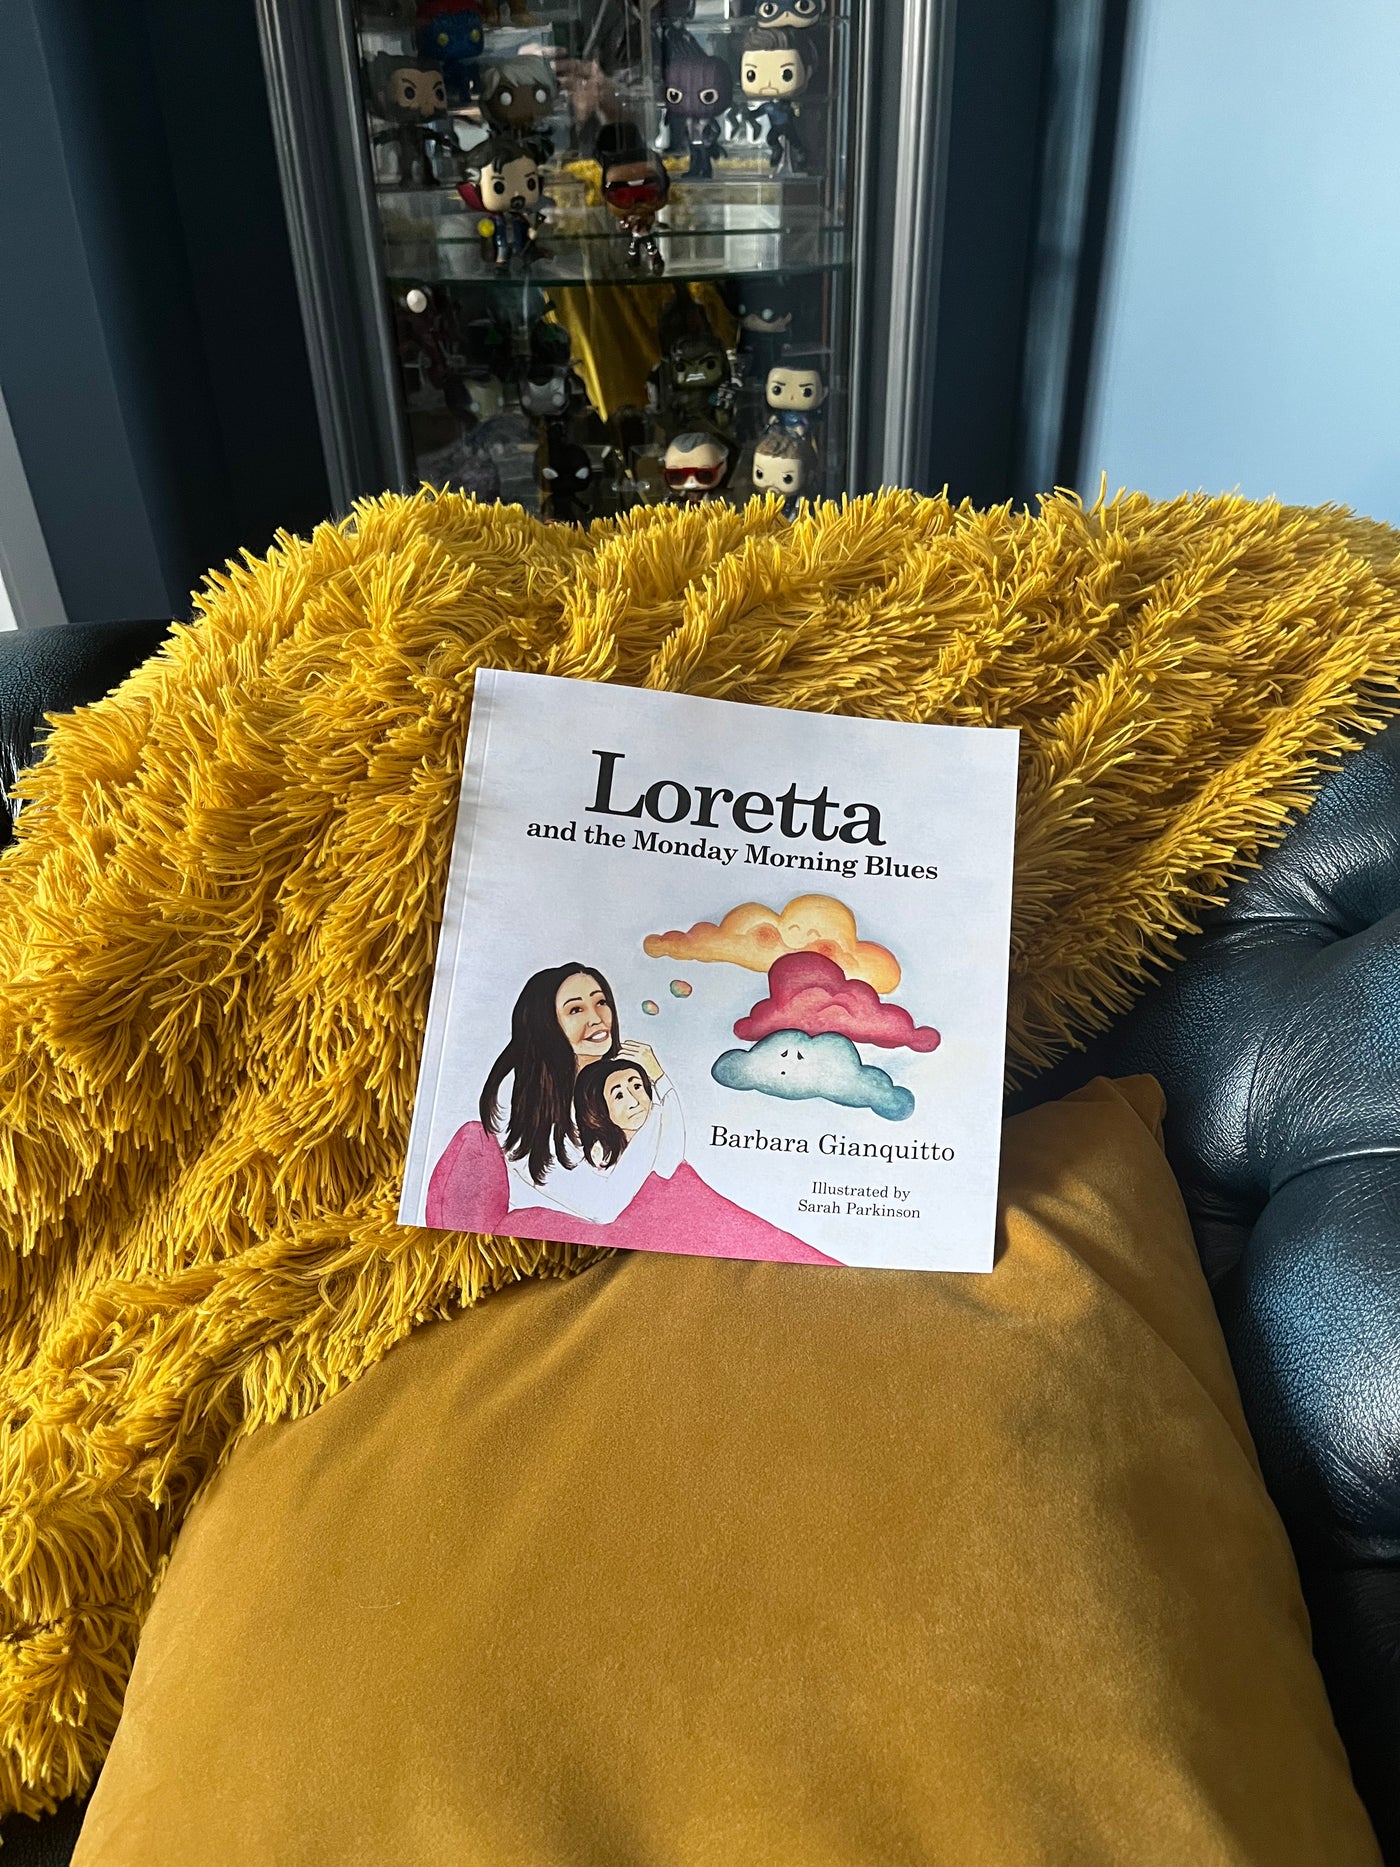 Loretta and the Monday Morning Blues - Children's book